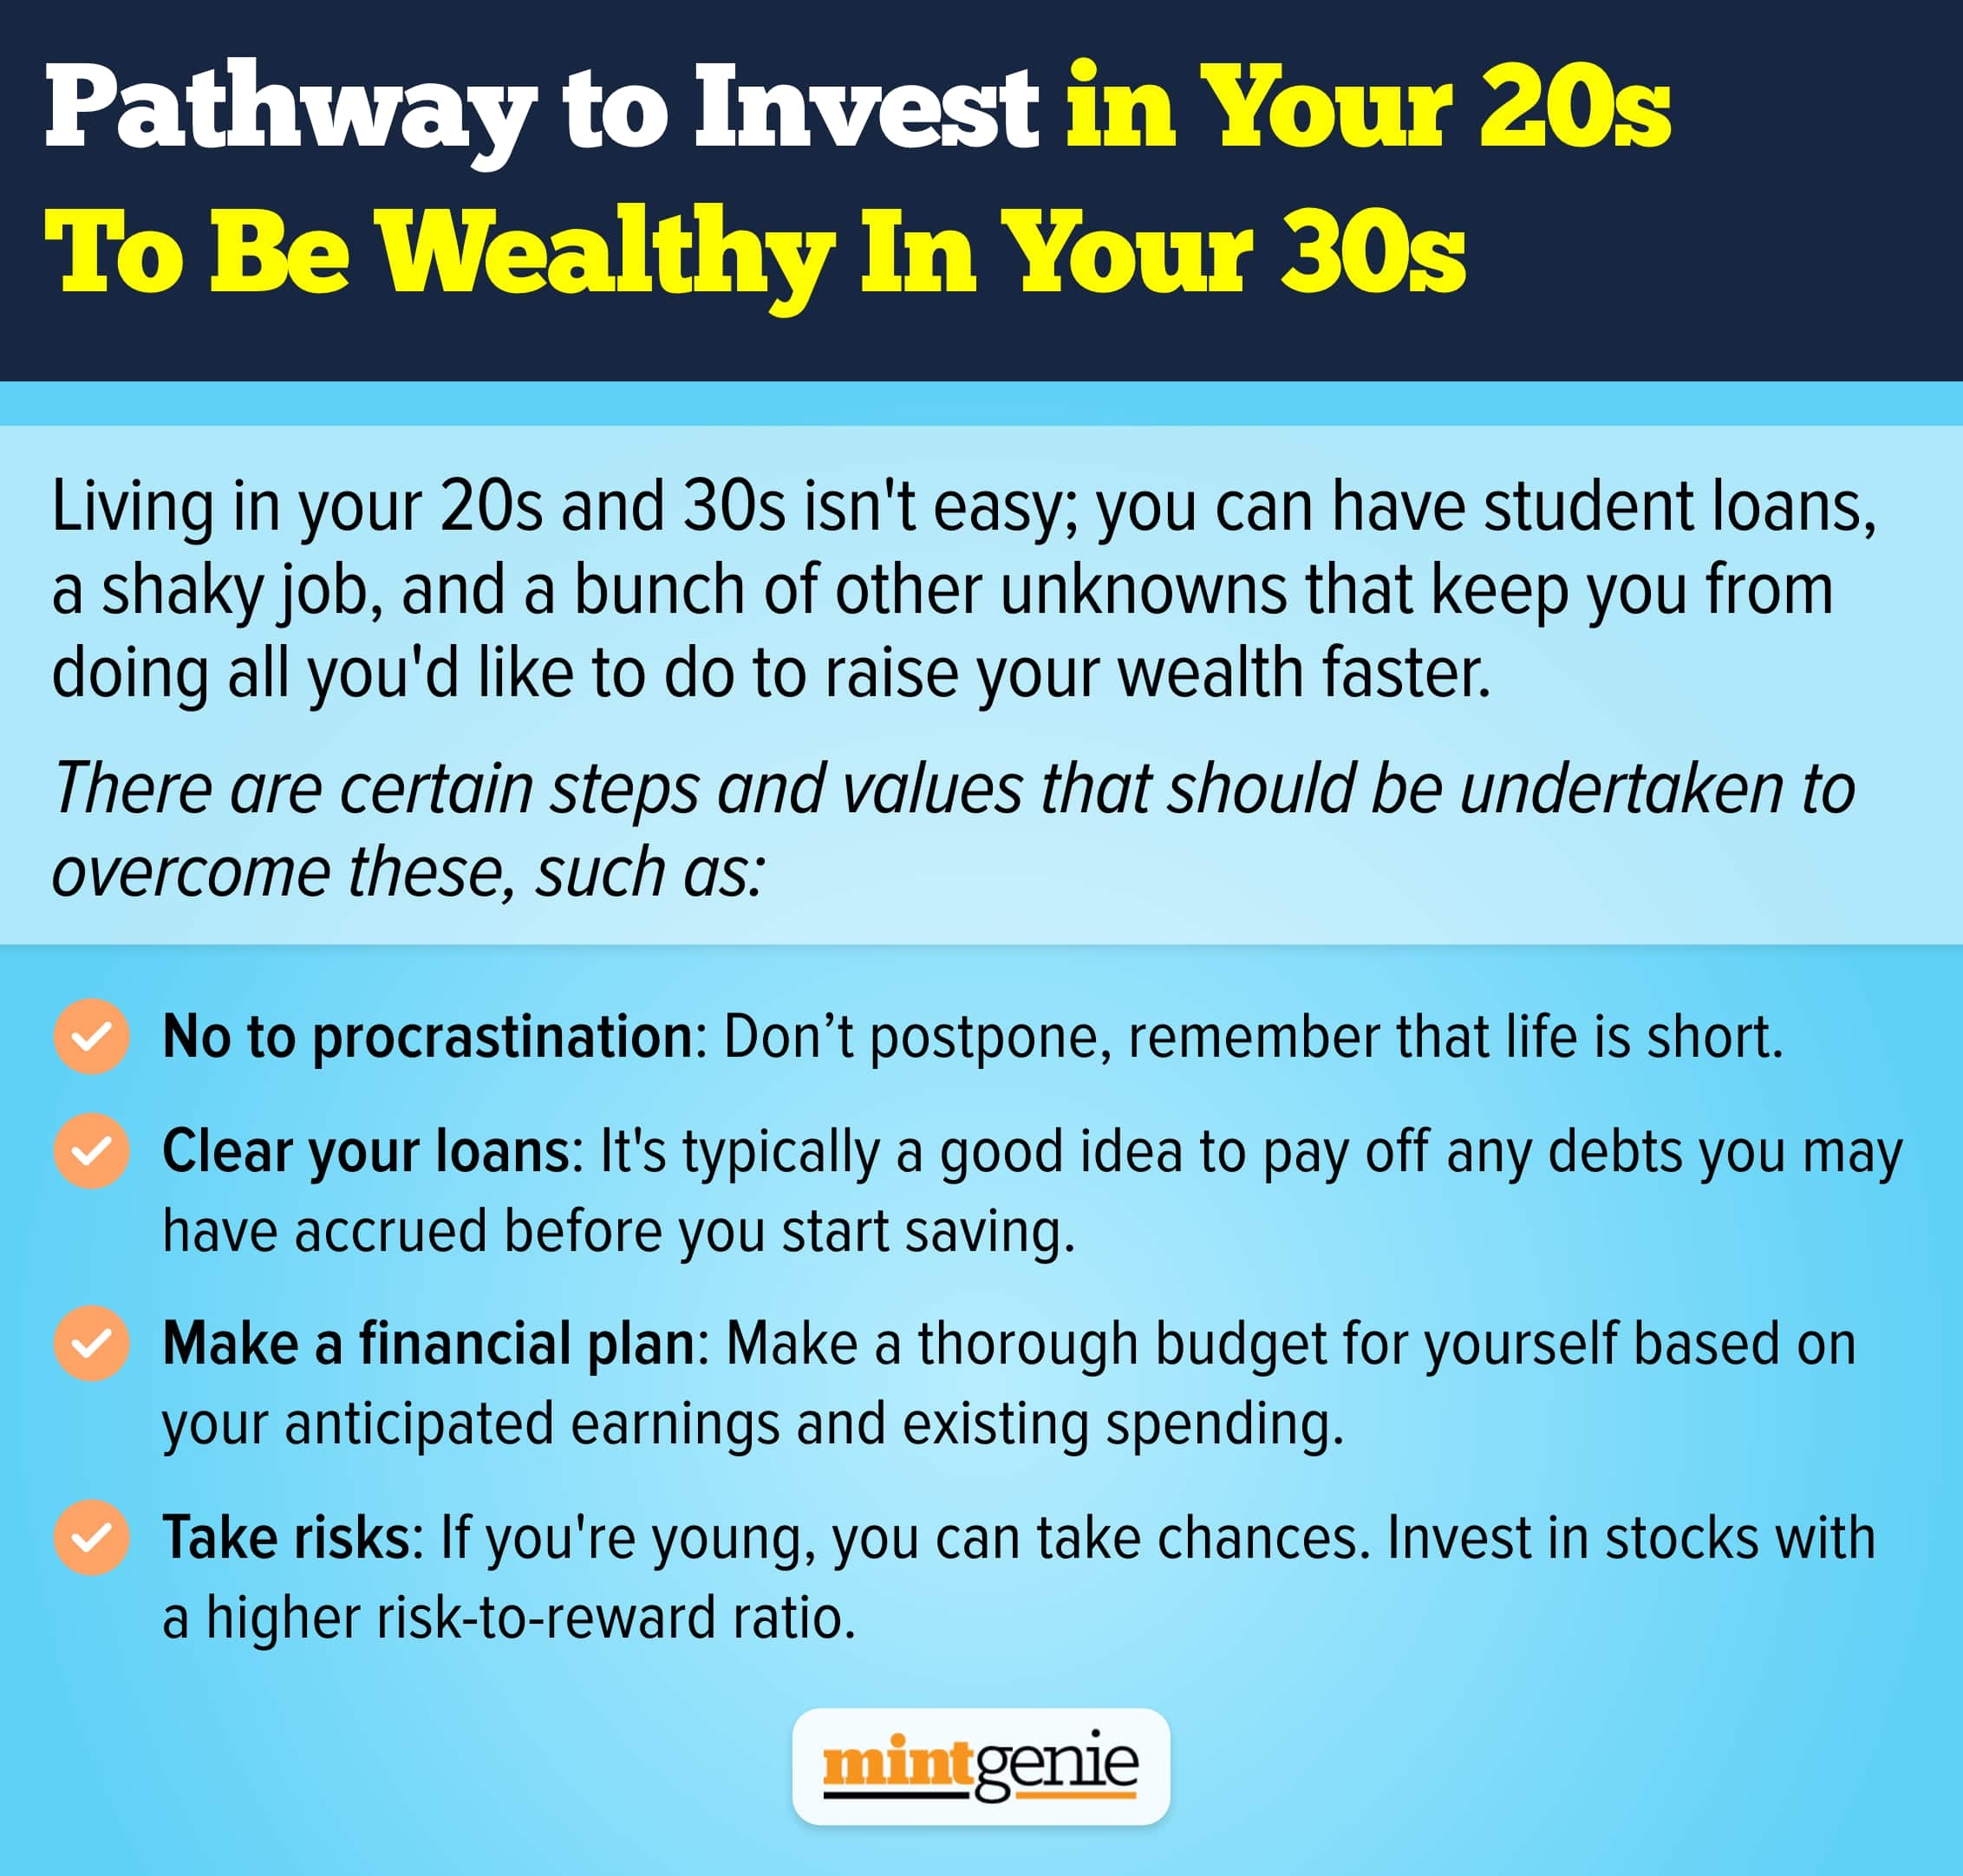 Pathway to invest in your 20s to be wealthy in your 30s